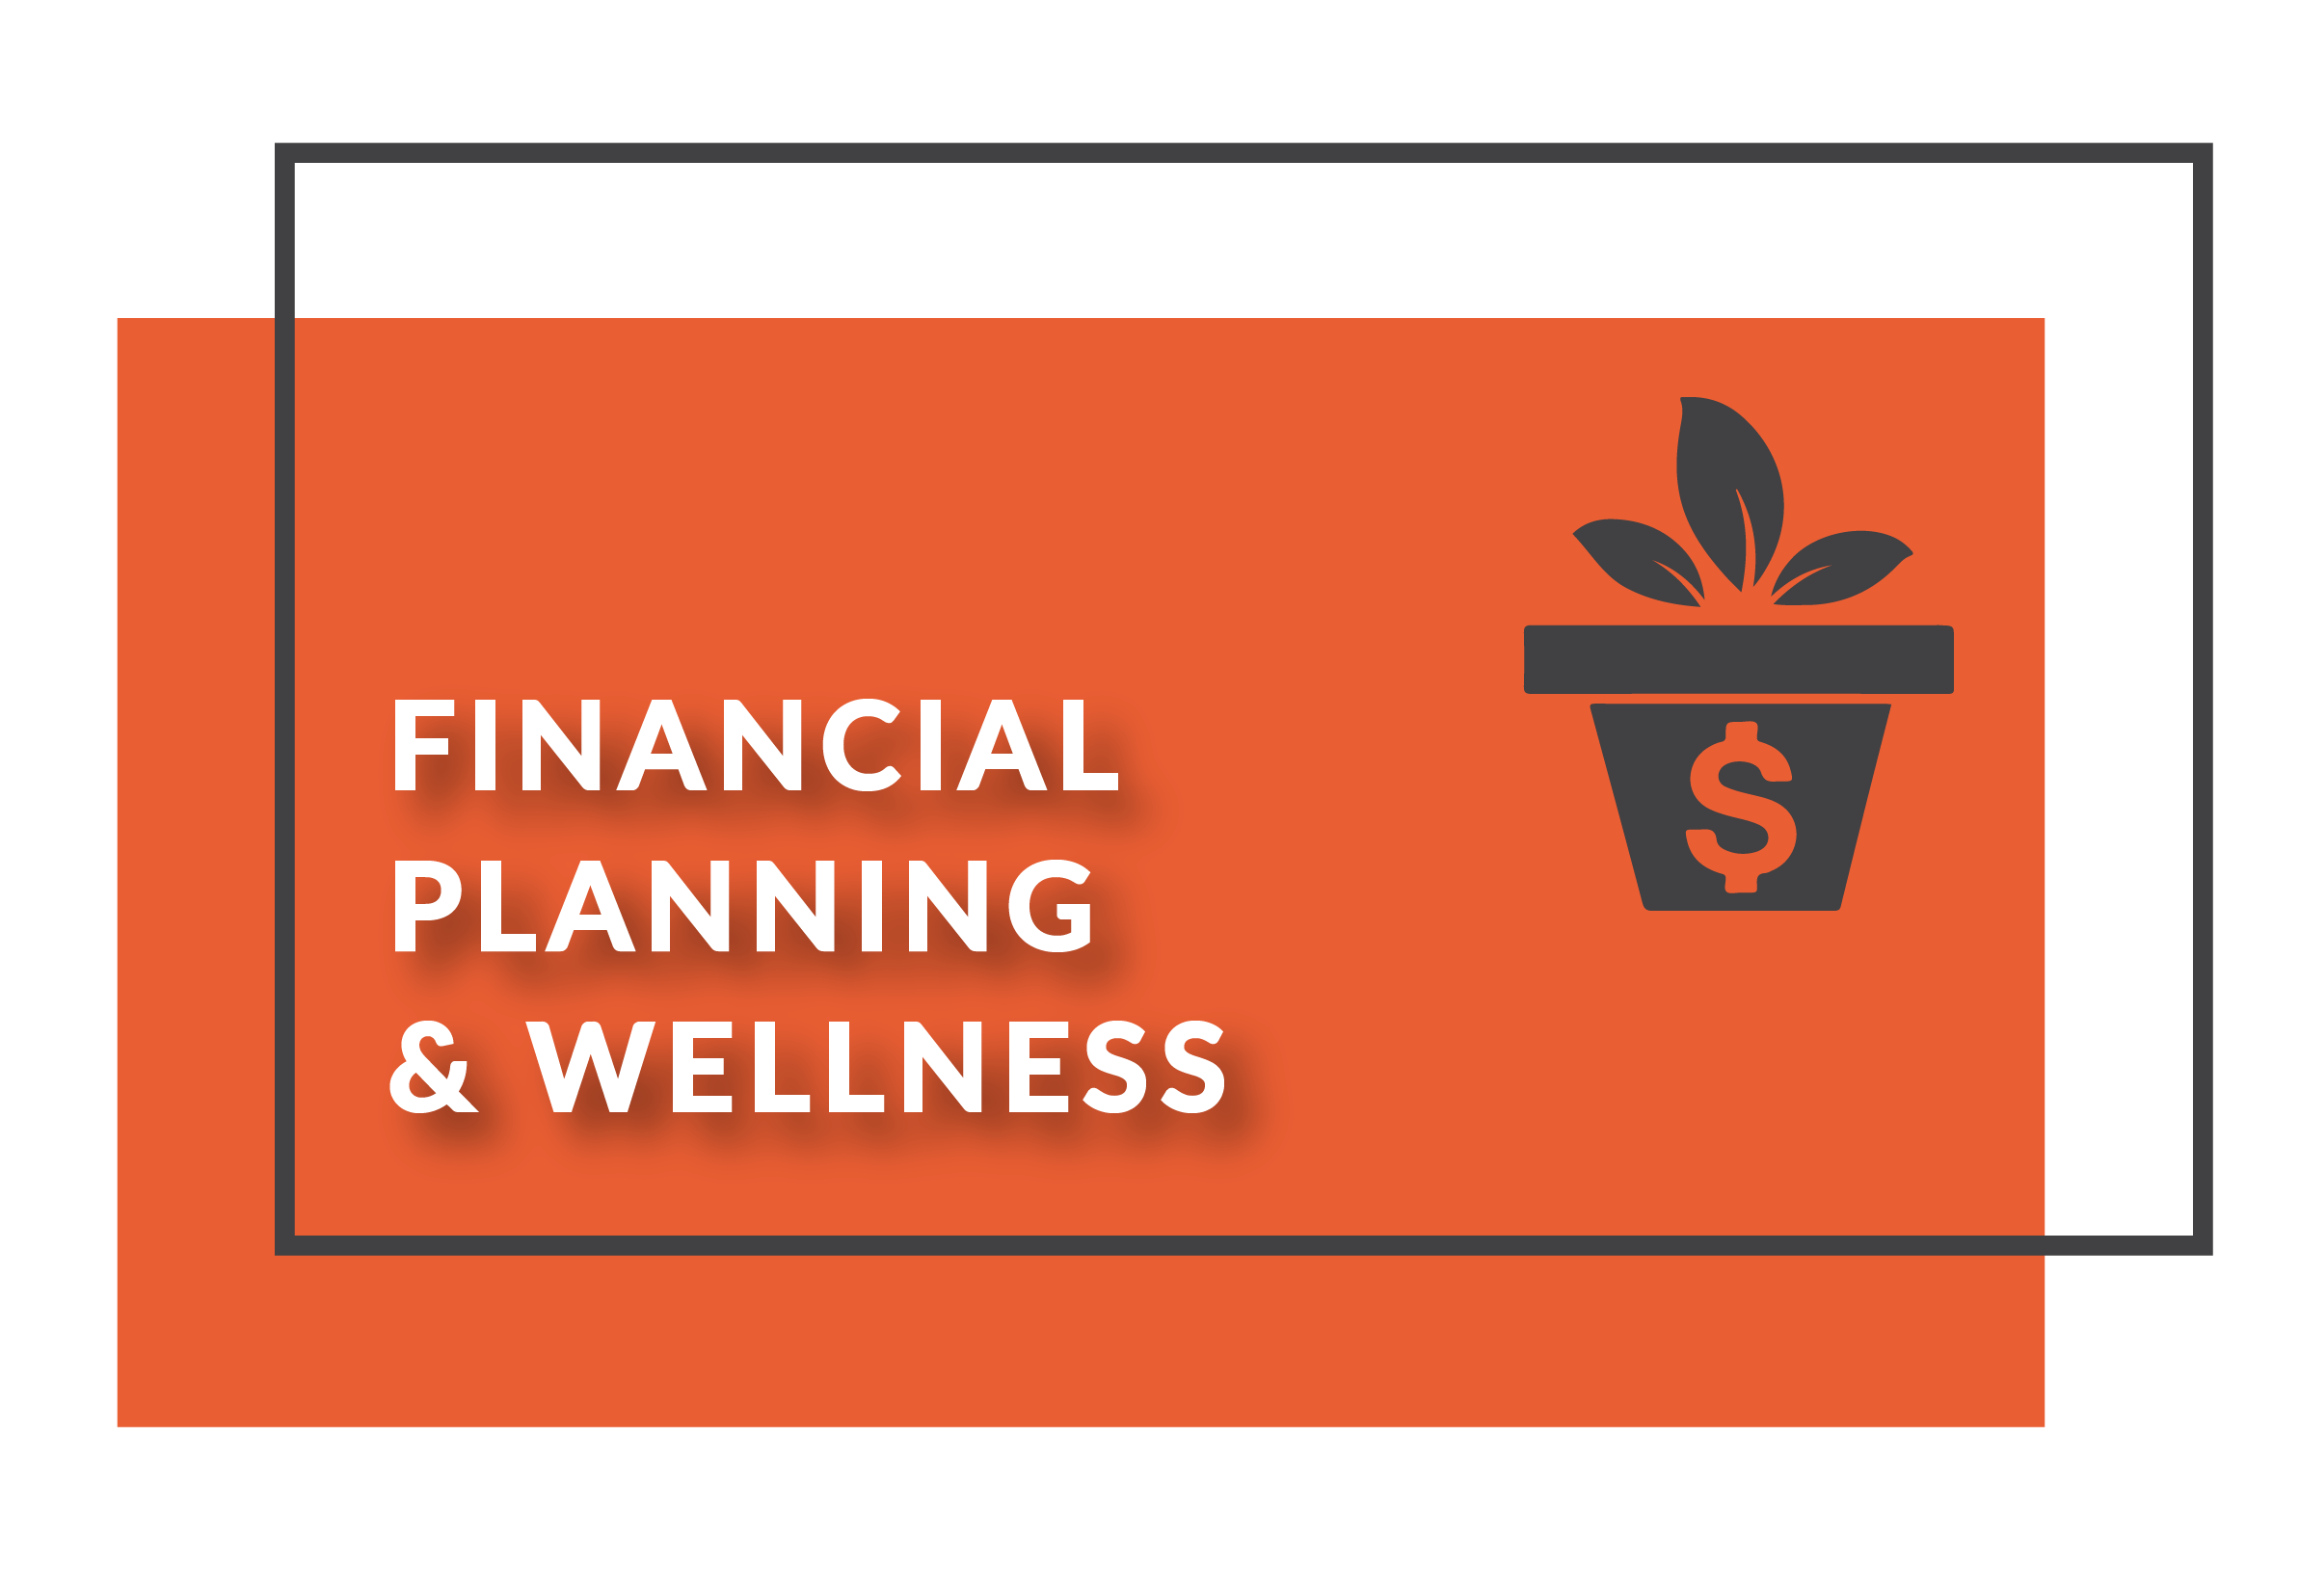 Financial planning and wellness resources